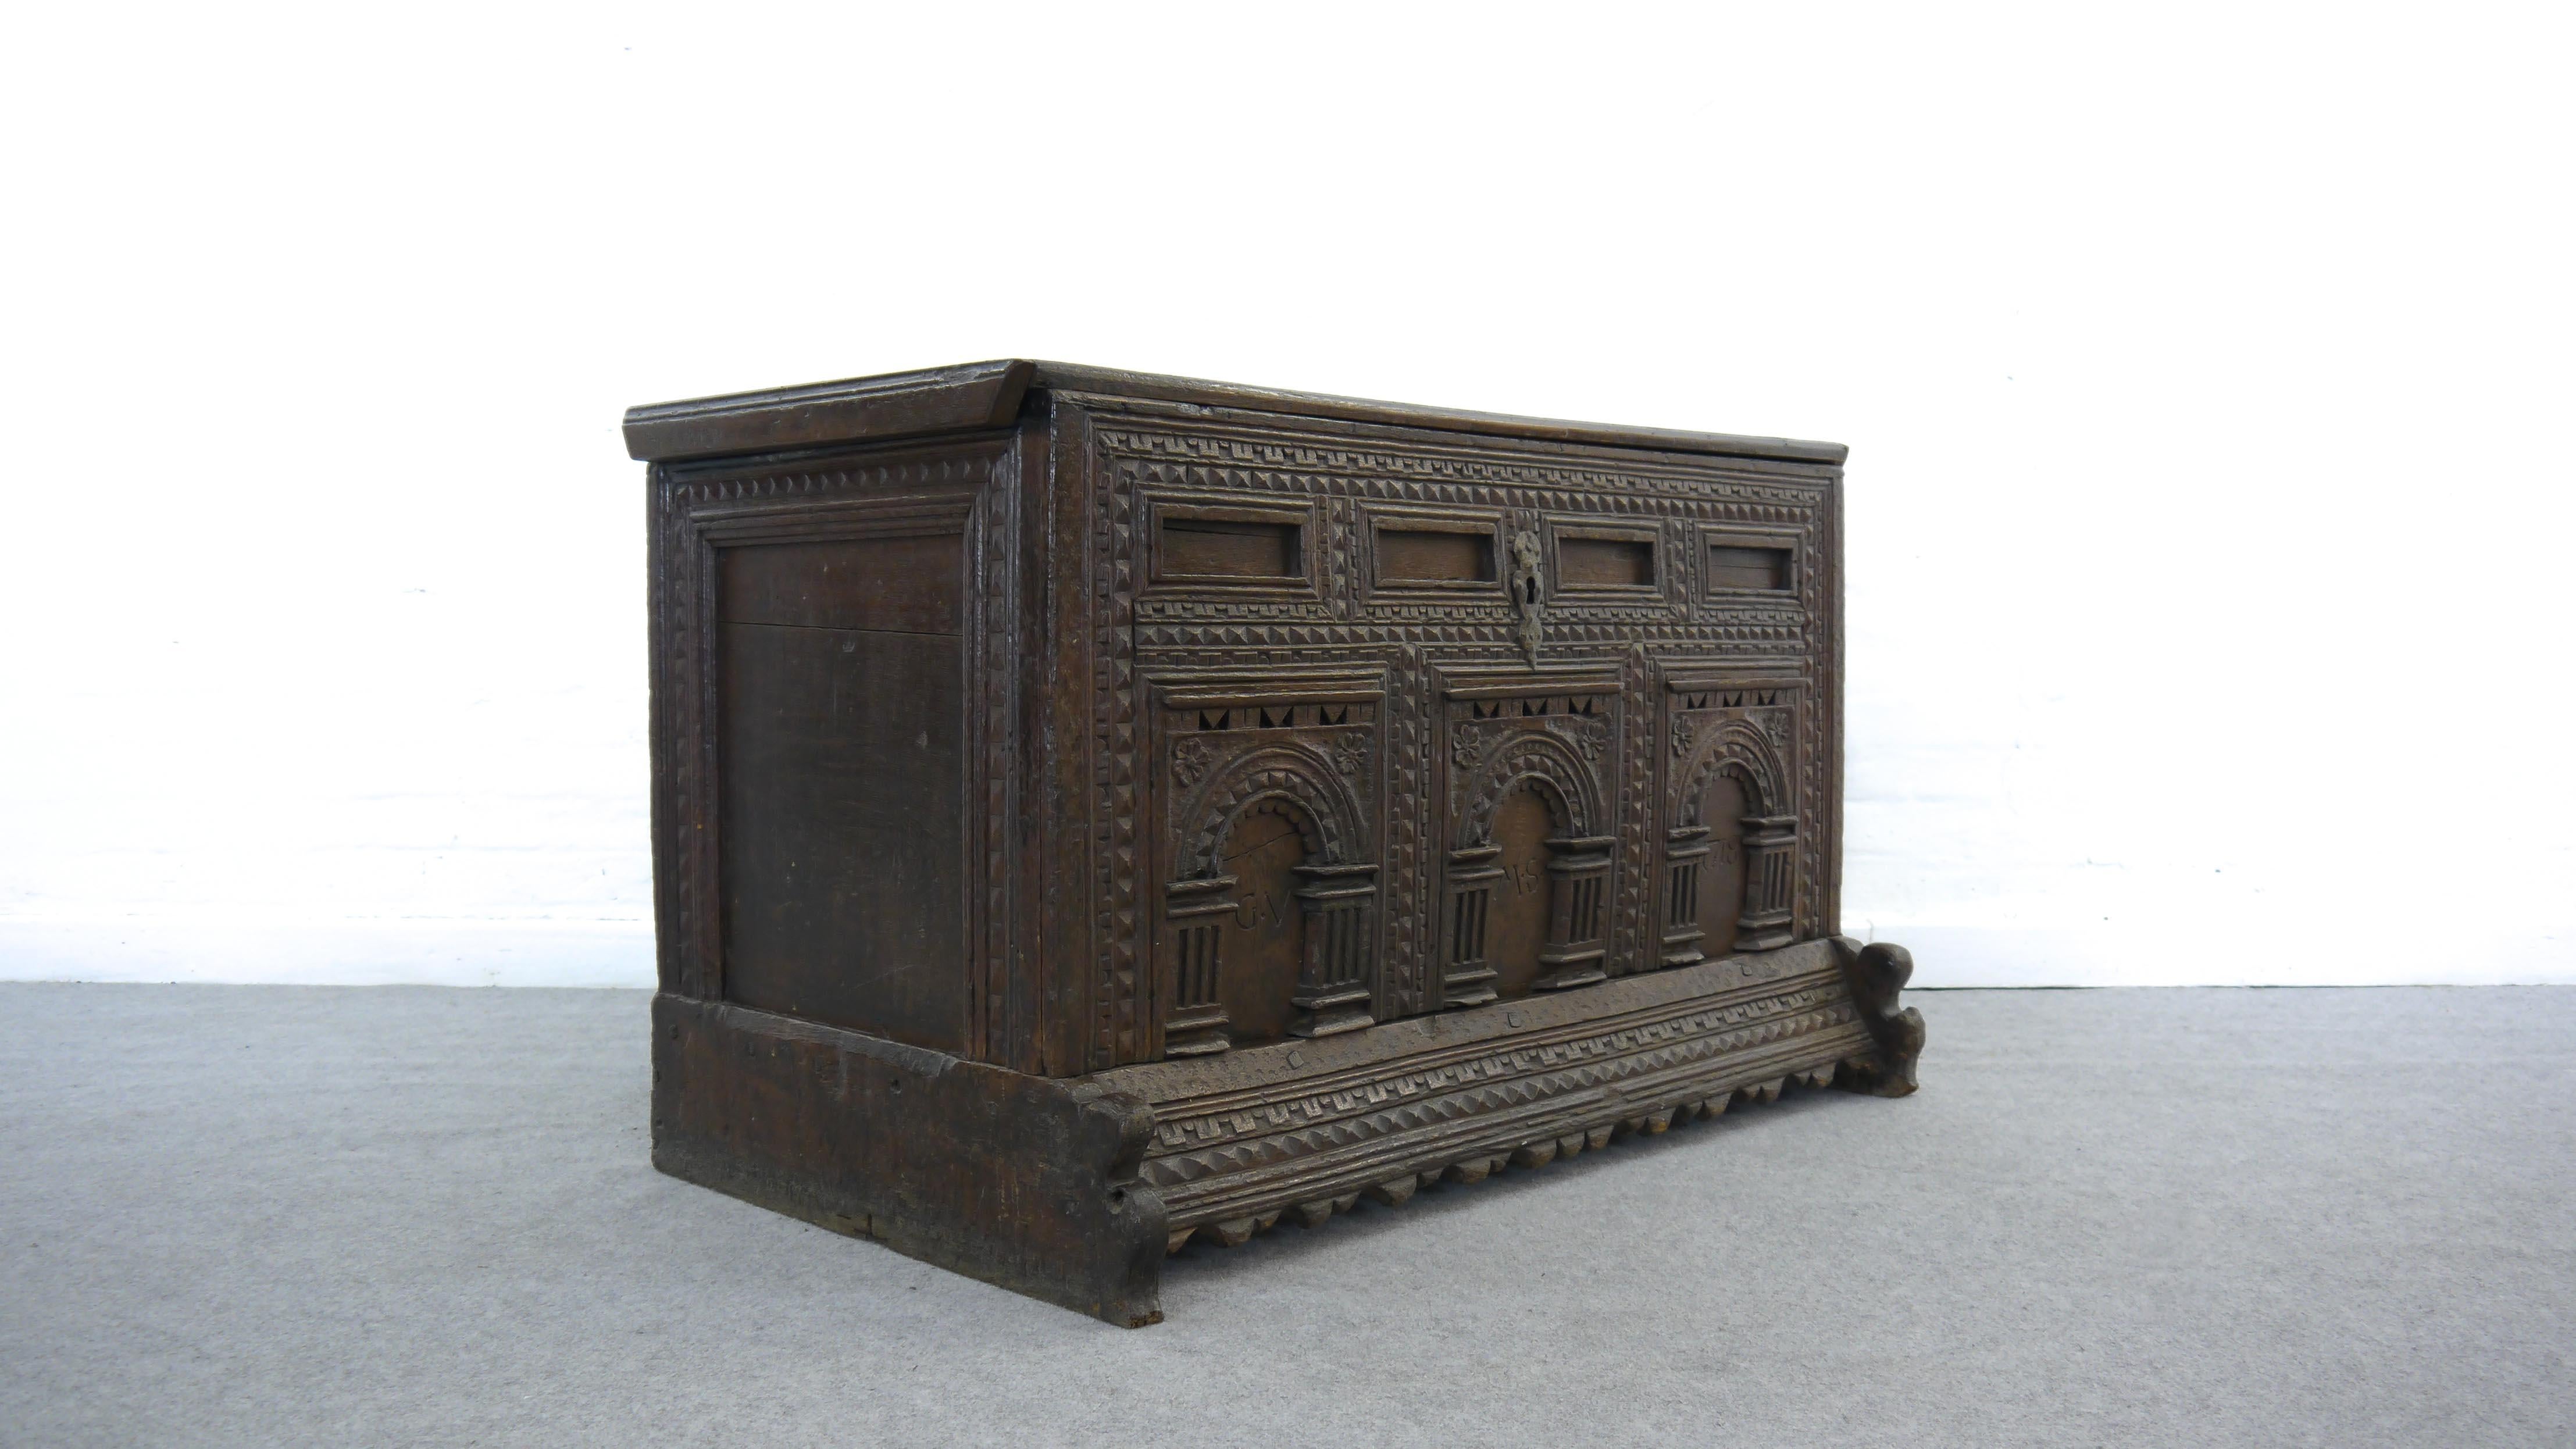 German Marriage chest / Aussteuertruhe, 301 years old! Dated 1718. Rich carvings in oakwood. Comes from the Region of Bad Rothenfelde, Lower Saxony. We could retrieve one name from the front side. G.V. - stands for the family Vigano.
Unoriginal lid,